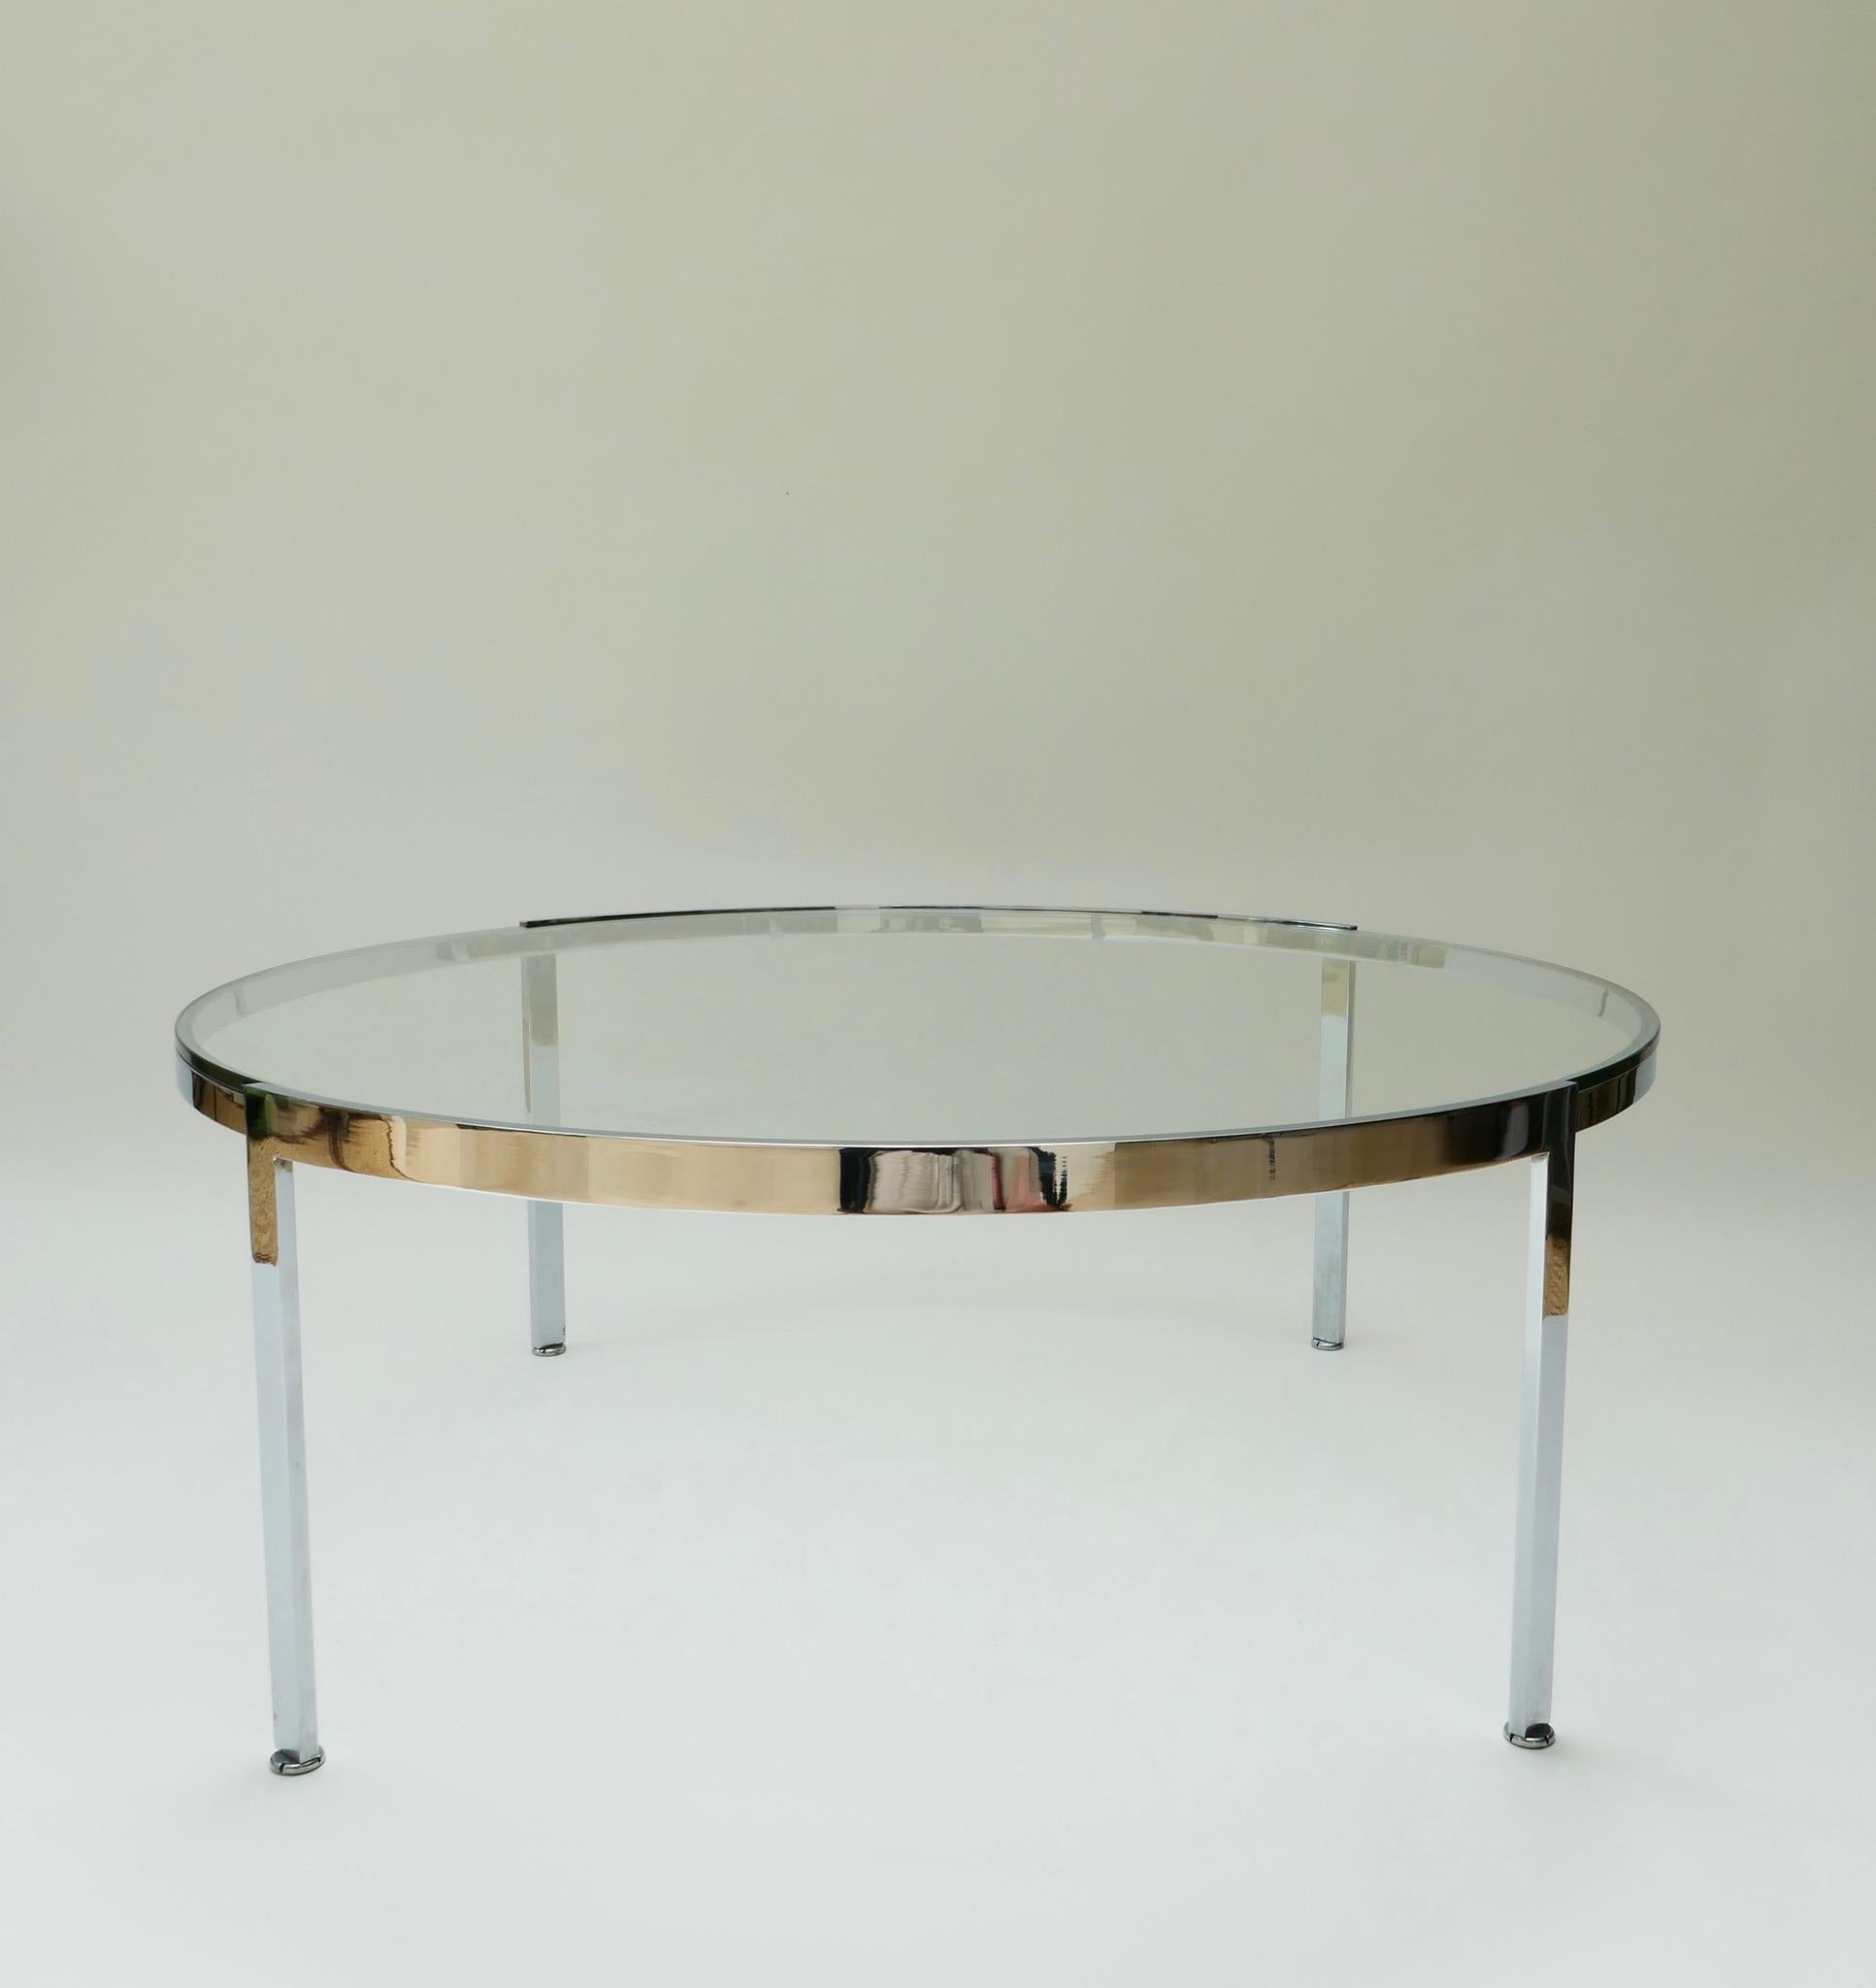 Minimalist Large Chrome and Glass Round Low Table, Italy, 1970s For Sale